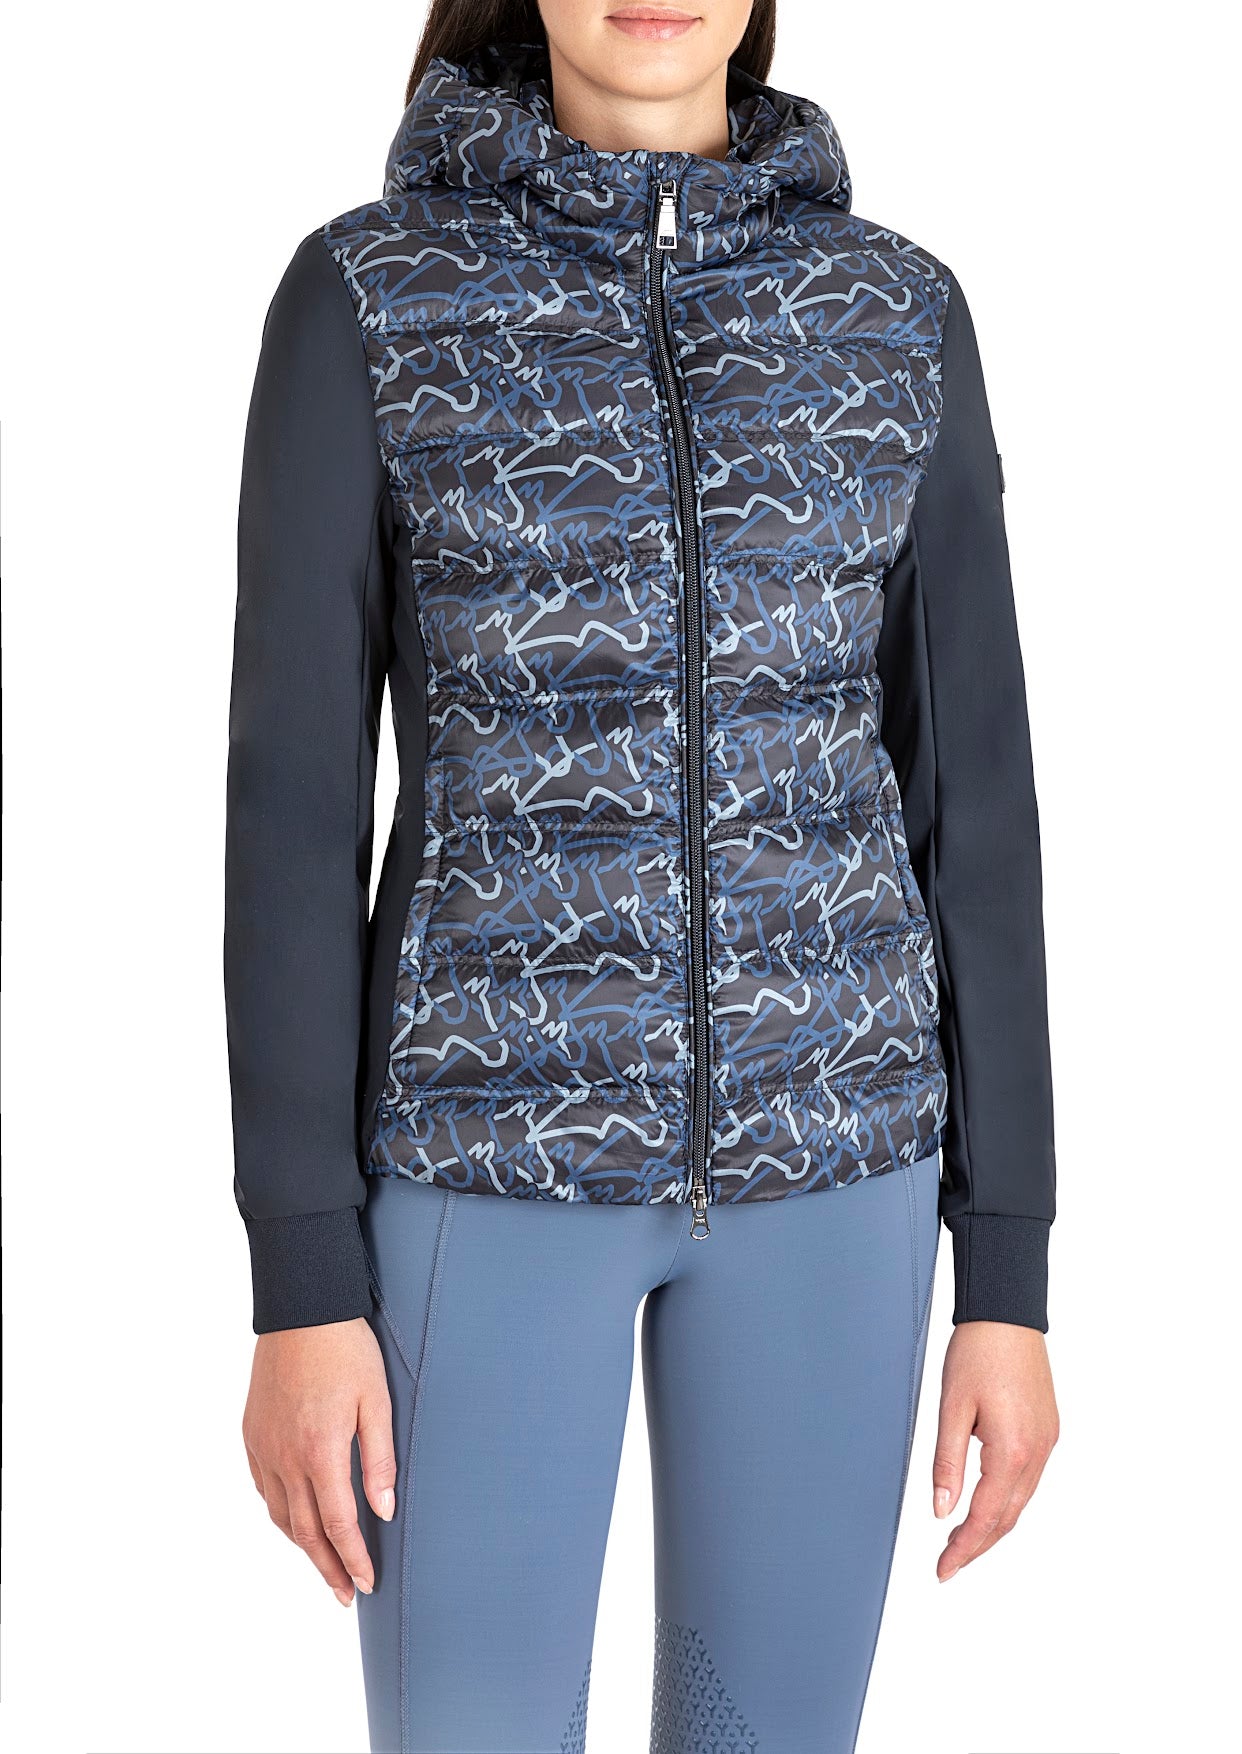 EQUILINE WOMENS PADDED SOFTSHELL JACKET ELRUBE  stand out from the crowd with the great jacket from Equiline. The lightweight yet v warm puffer front with their new horse graphic design  and soft shell sleeves make this a perfect jacket.   Coordinating jumper and breeches available 